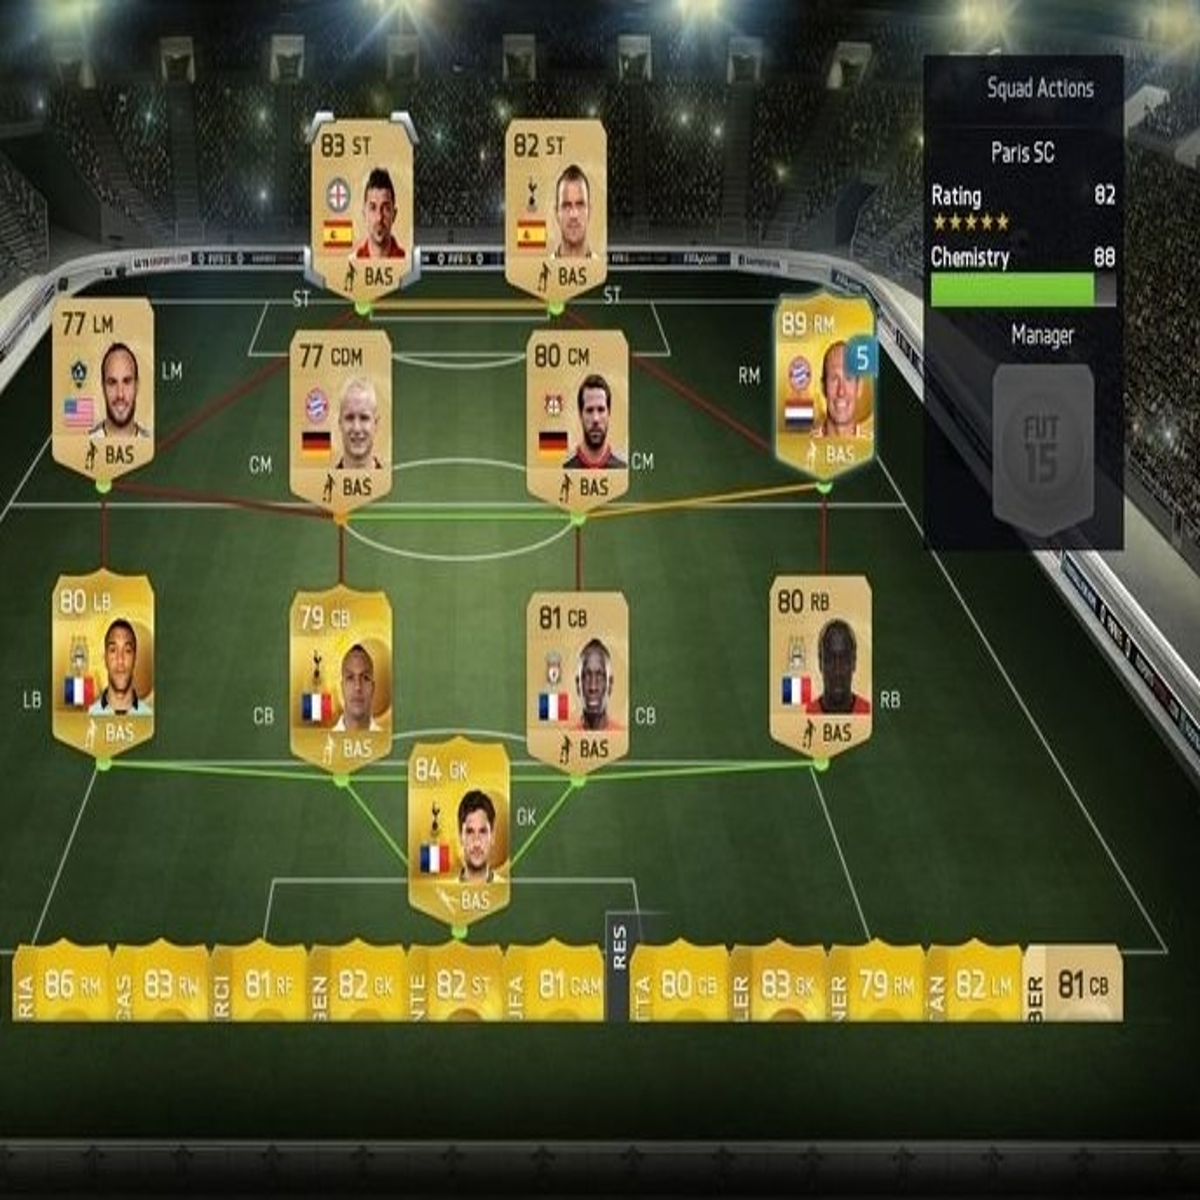 FIFA 15 Ultimate Team Web App Is Live, Access Limited for the Moment